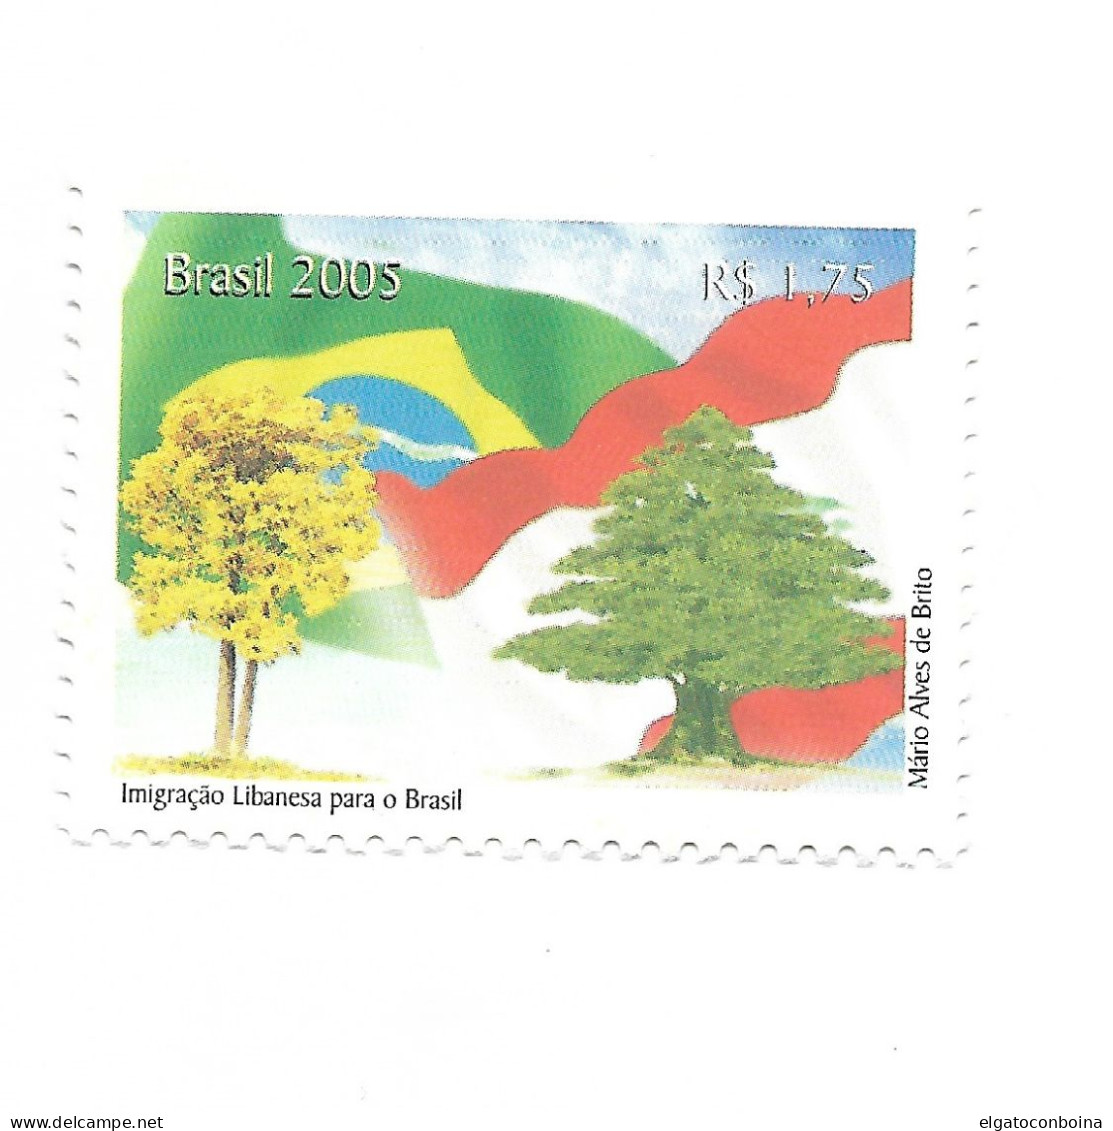 BRAZIL 2005 LIBANESE INMIGRATION TO BRAZIL FLAGS TREE CULTURES 1 VALUE MINT NH - Unused Stamps